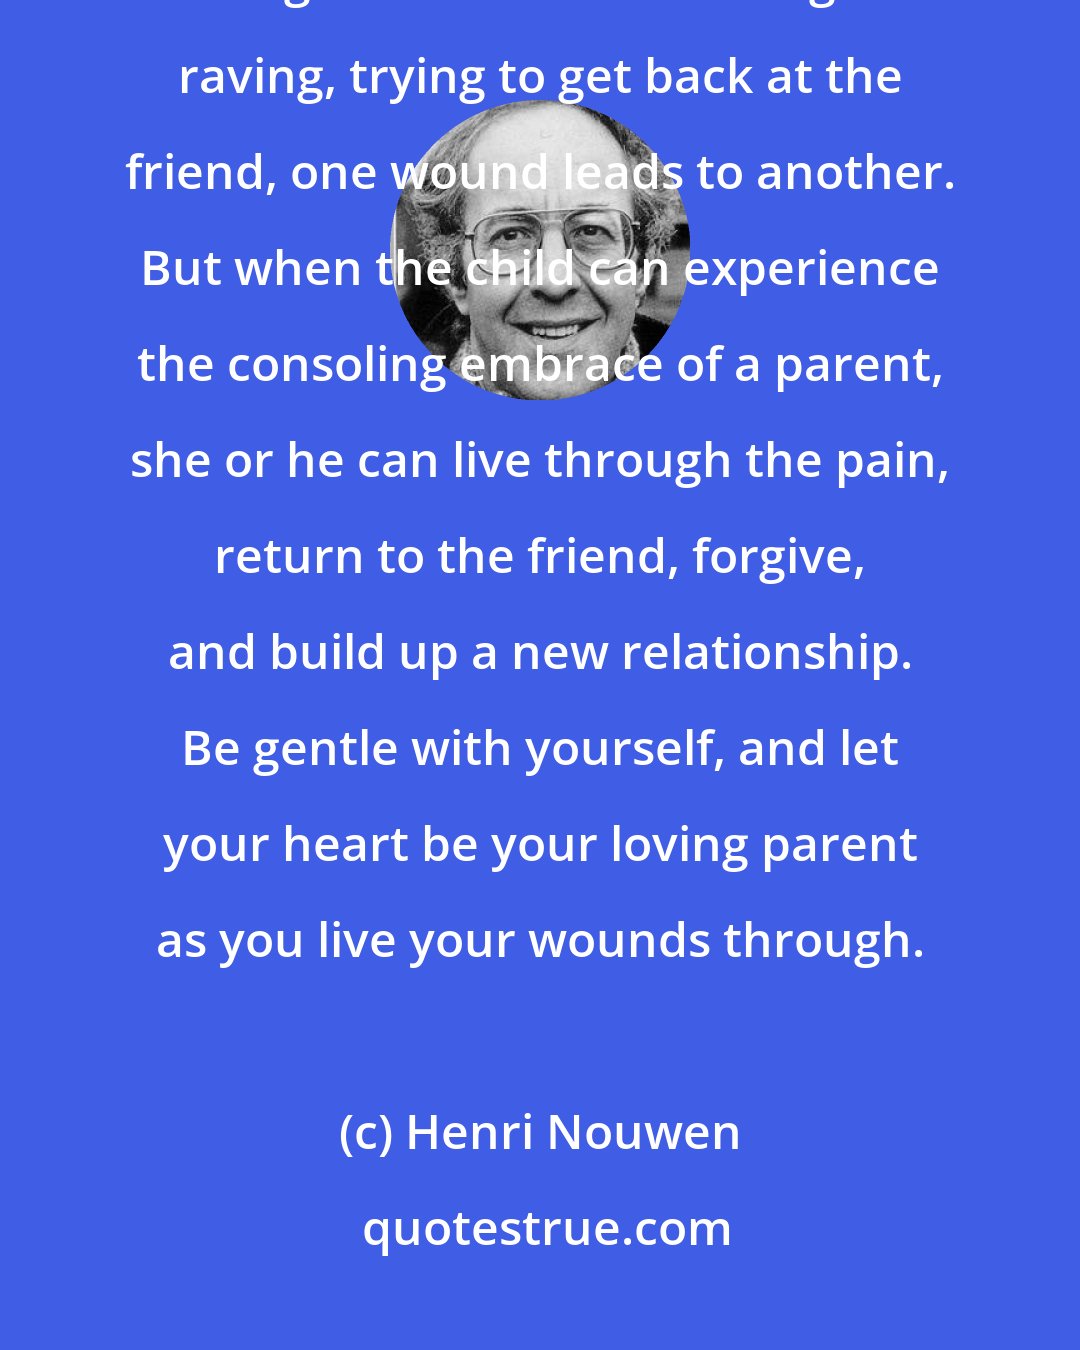 Henri Nouwen: Think of each wound as you would of a child who has been hurt by a friend. As long as that child is ranting and raving, trying to get back at the friend, one wound leads to another. But when the child can experience the consoling embrace of a parent, she or he can live through the pain, return to the friend, forgive, and build up a new relationship. Be gentle with yourself, and let your heart be your loving parent as you live your wounds through.